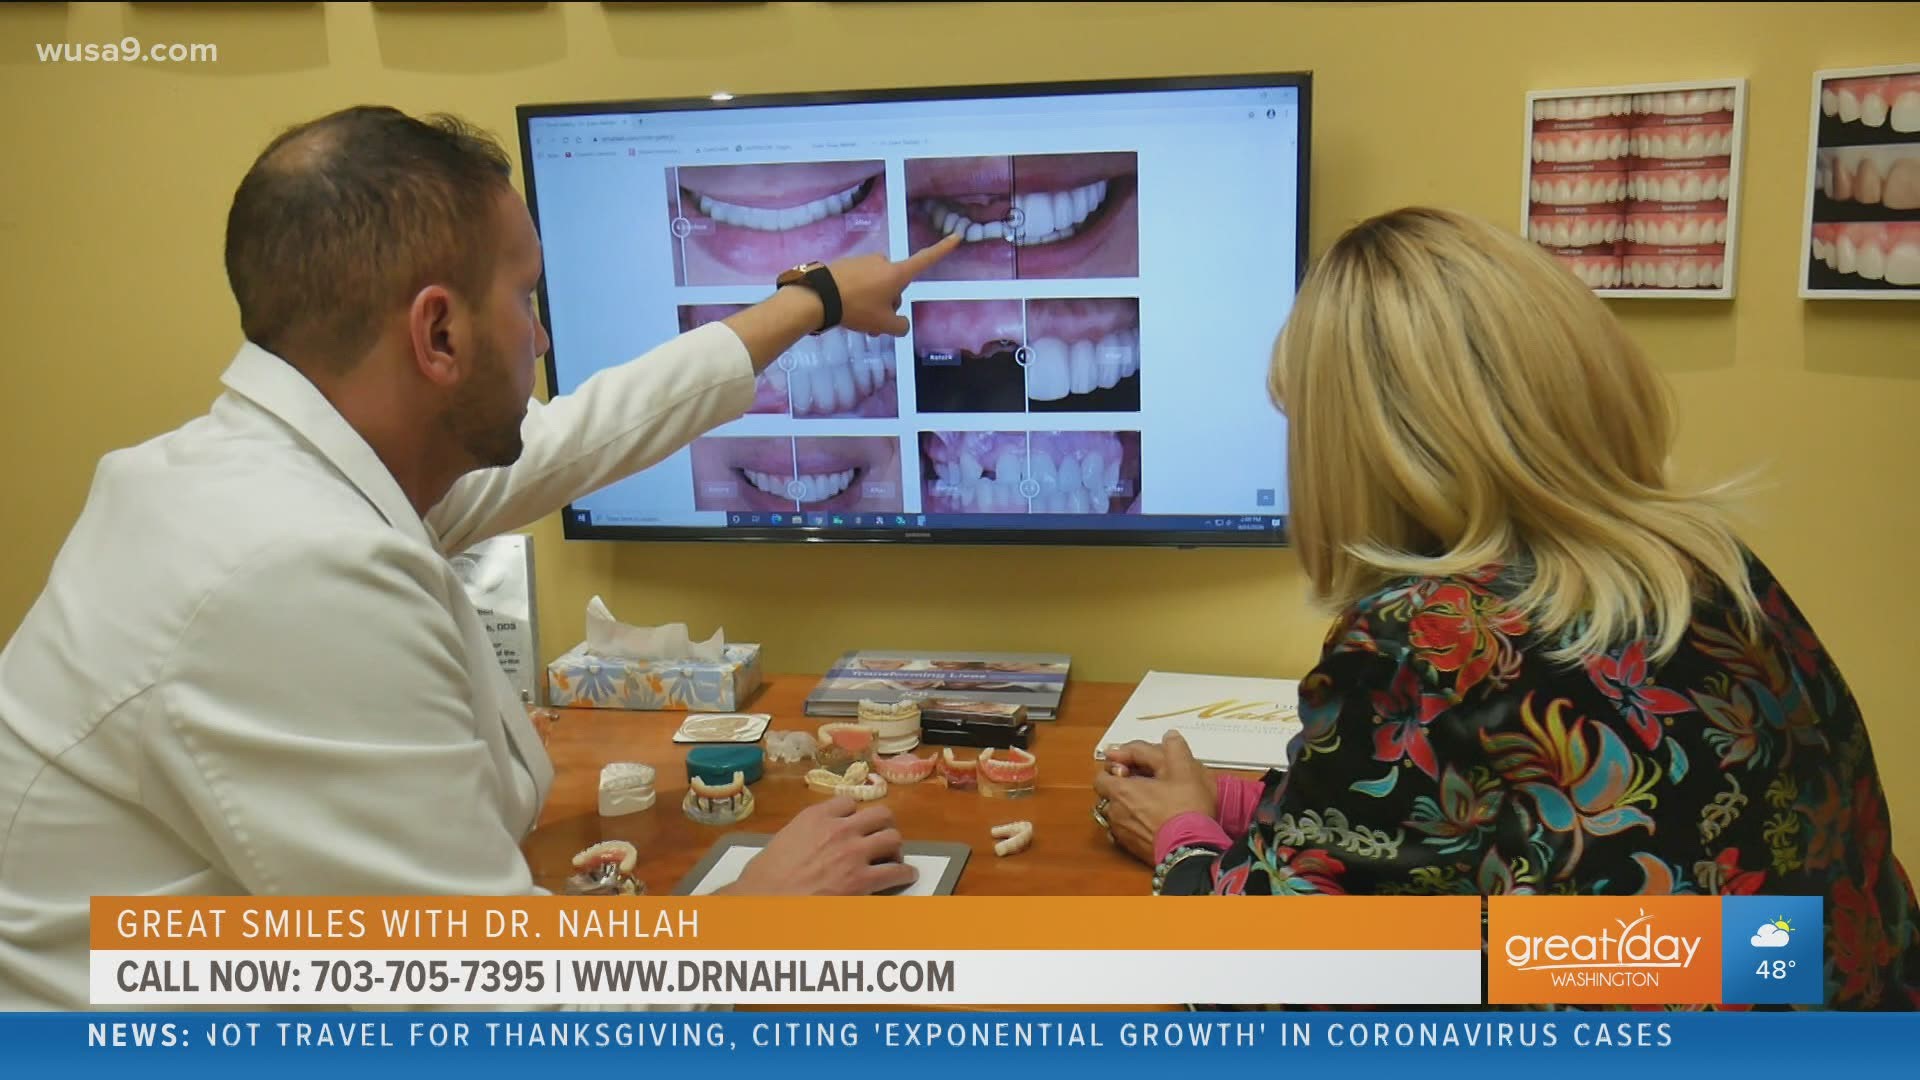 One Great Day Washington viewer gives a touching testimonial on how Dr. Nahlah changed her smile. Sponsored by Dr. Nahlah. Visit DrNahlah.com or call 703-705-7395.